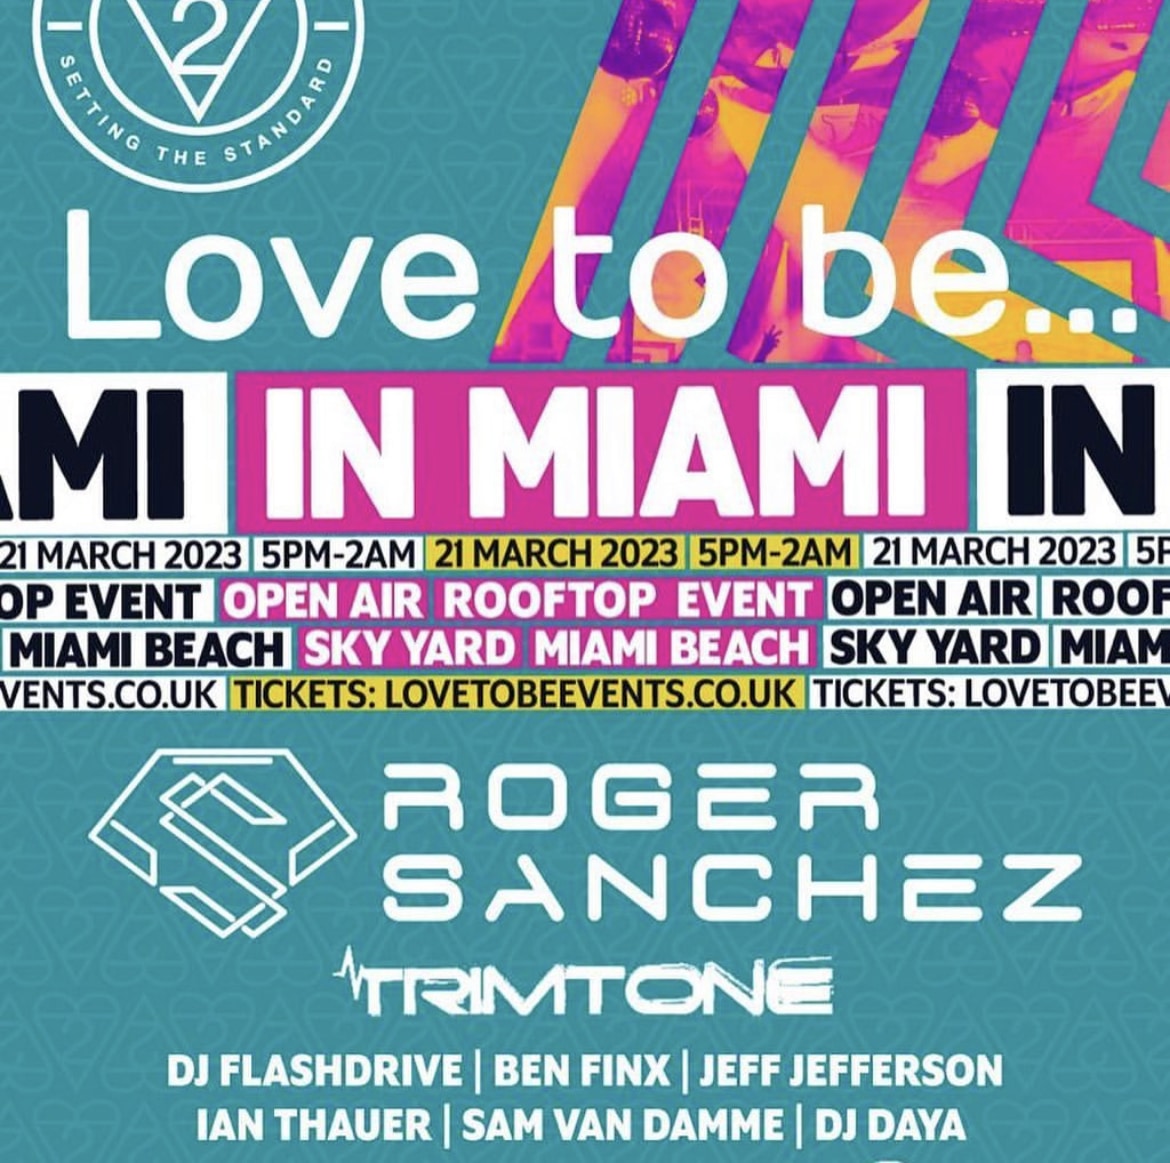 Love to be... In Miami